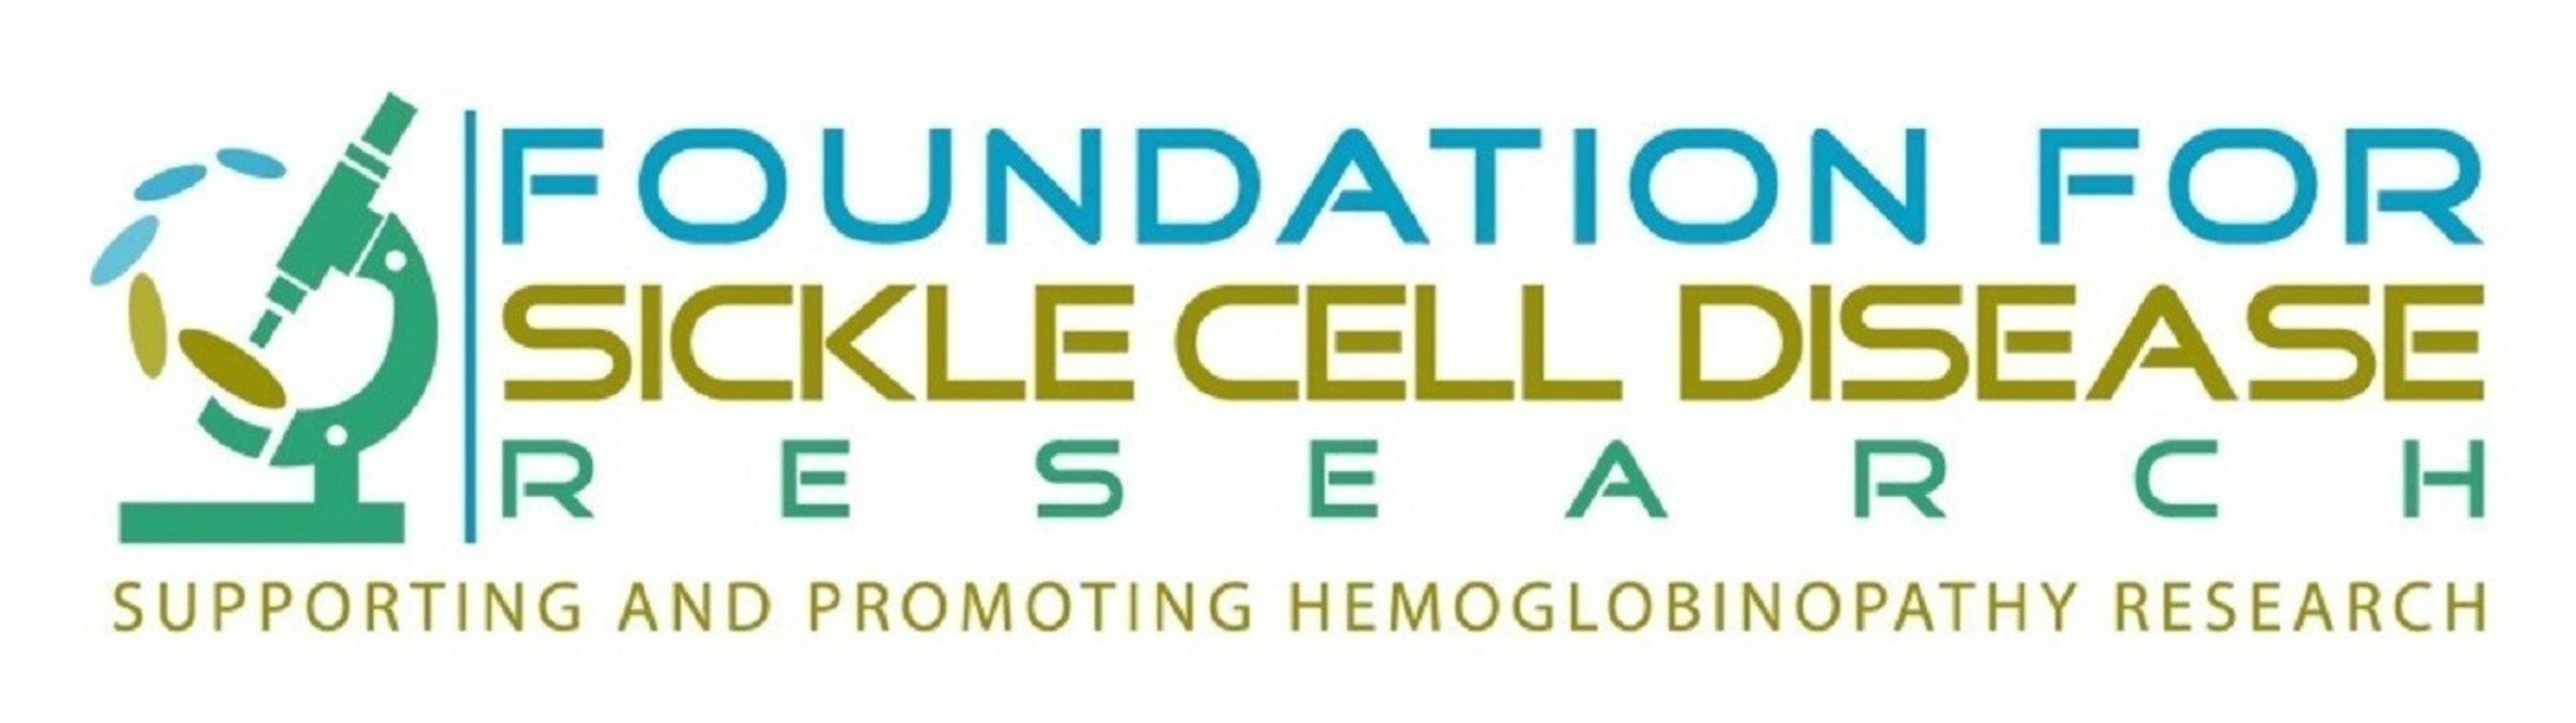 Supporting Research, Patient Care and Avdocacy in Sickle Cell Disease